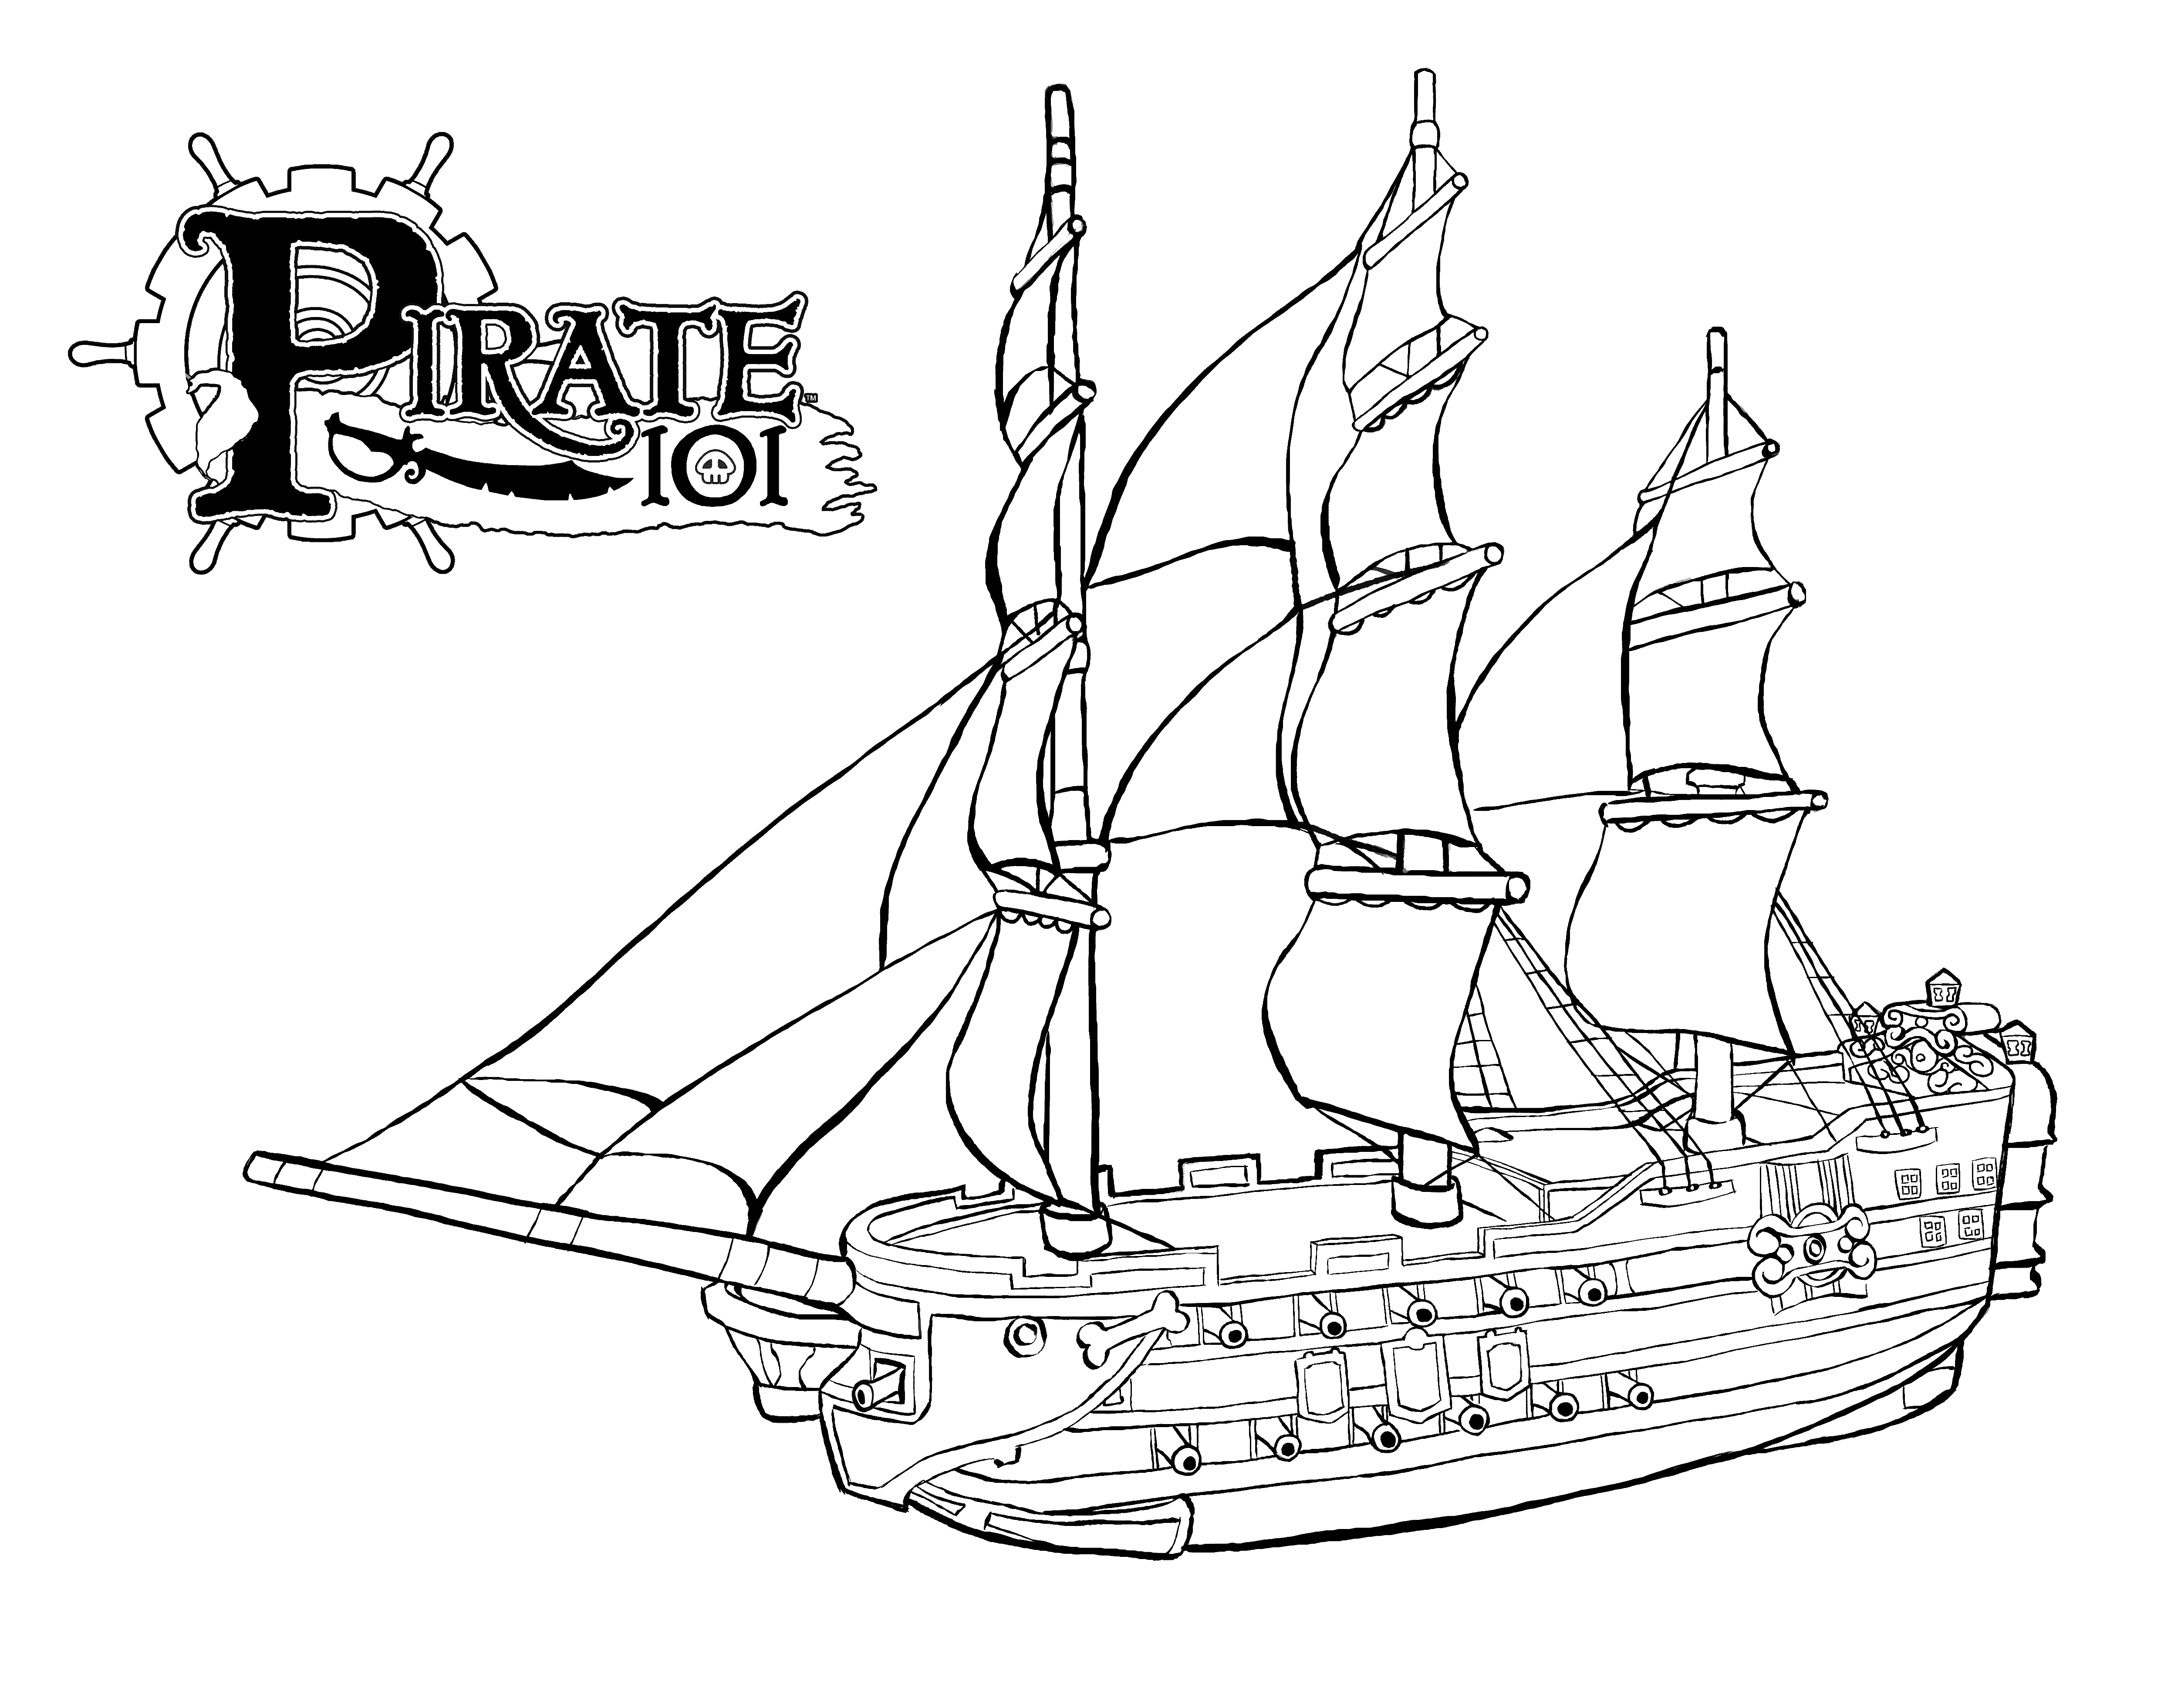 Pirate Ship Coloring Sheet - Get Coloring Pages